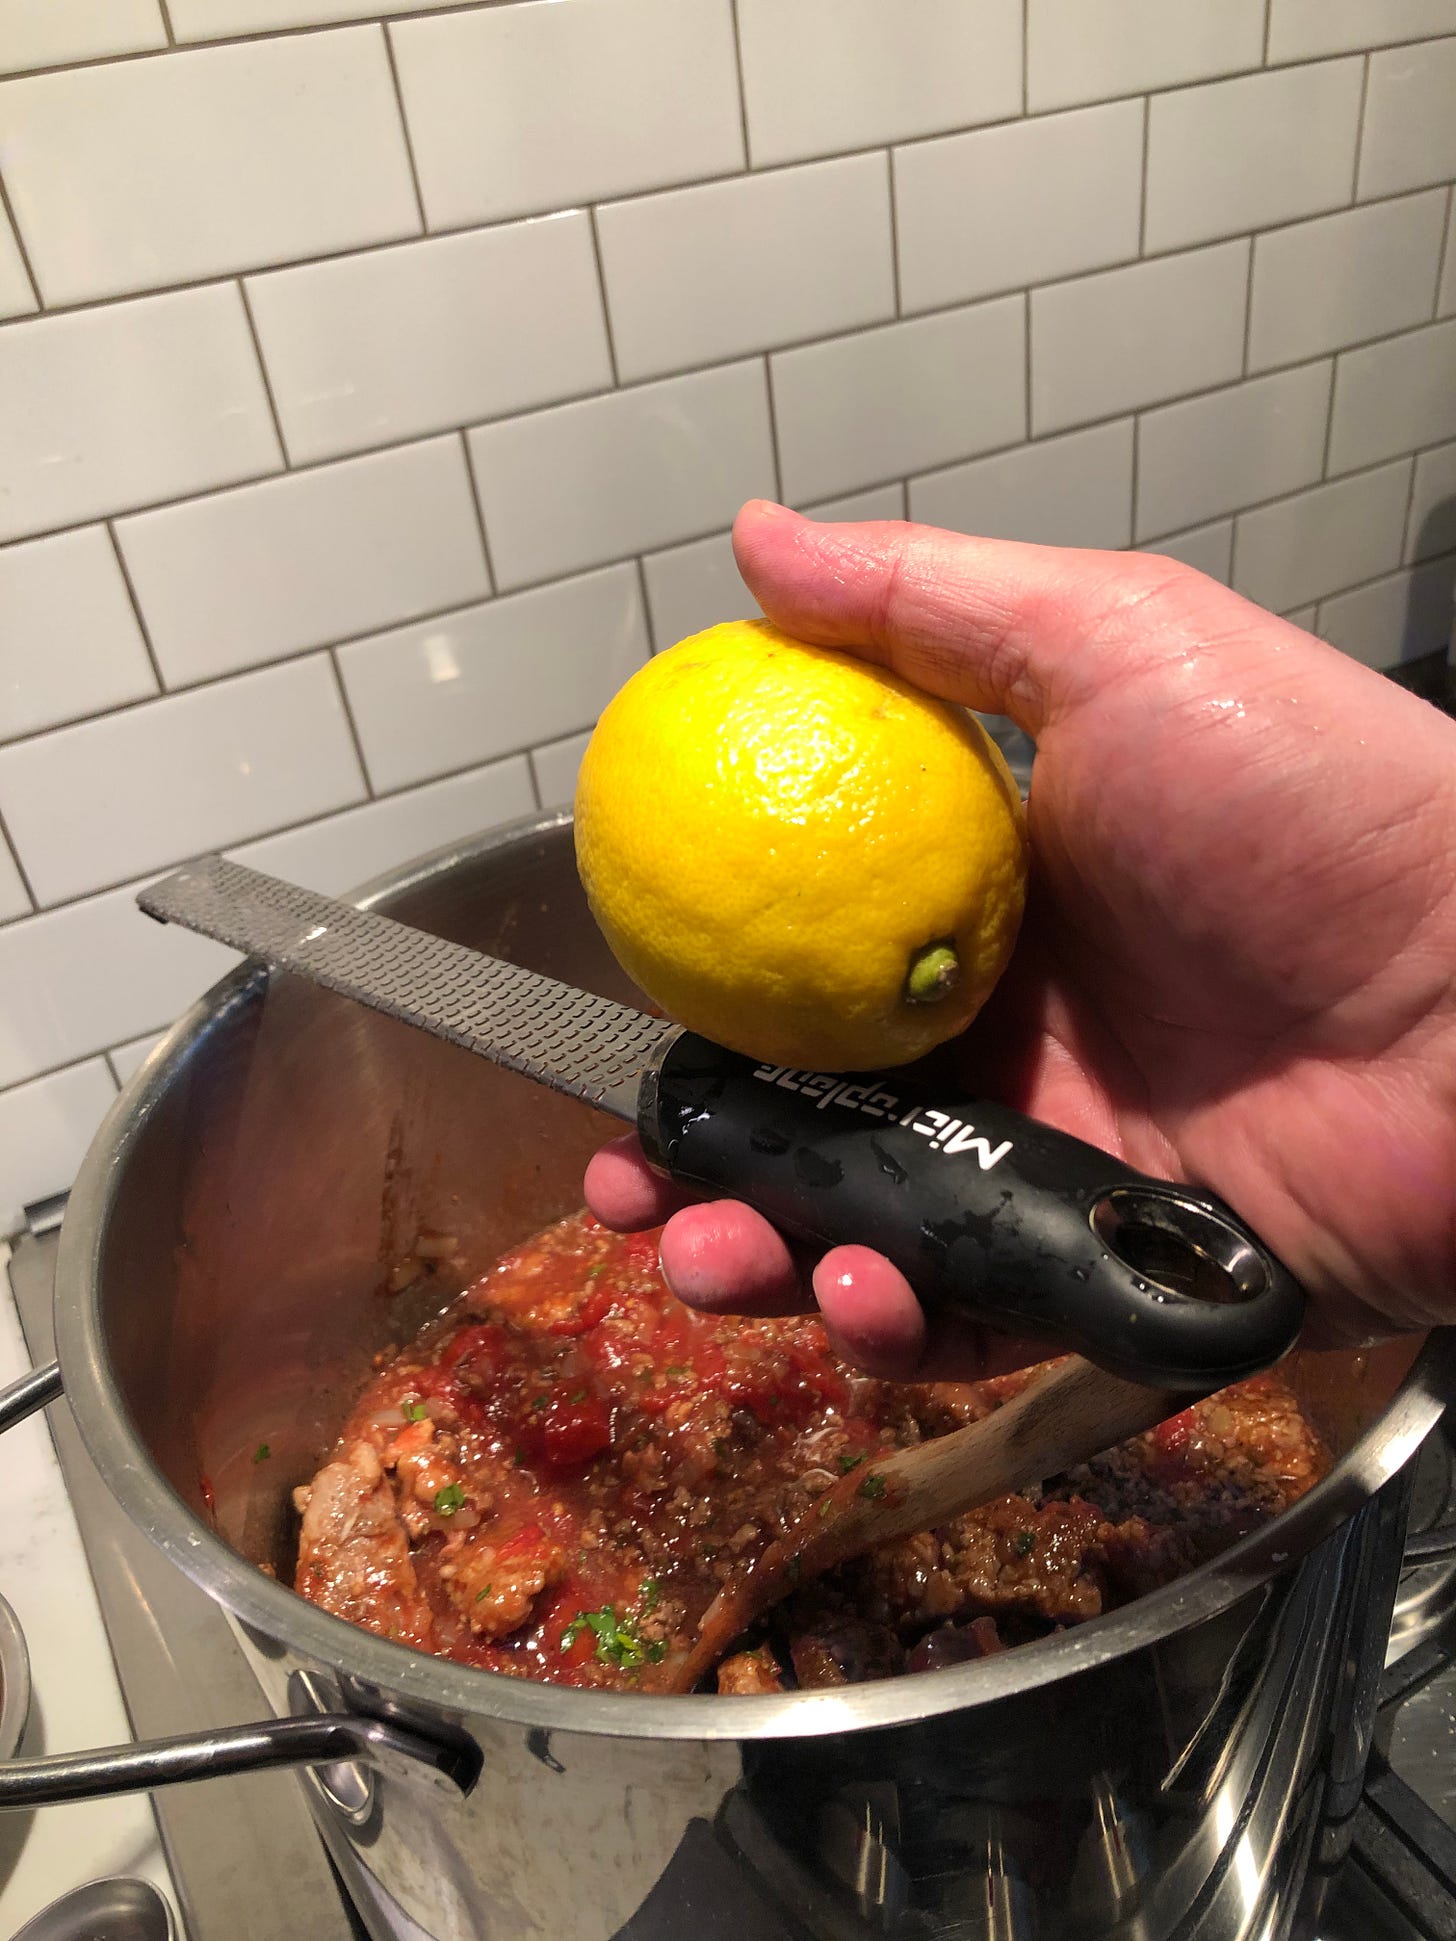 A hand holding a lemon and a Microplane grater over the pot of sauce